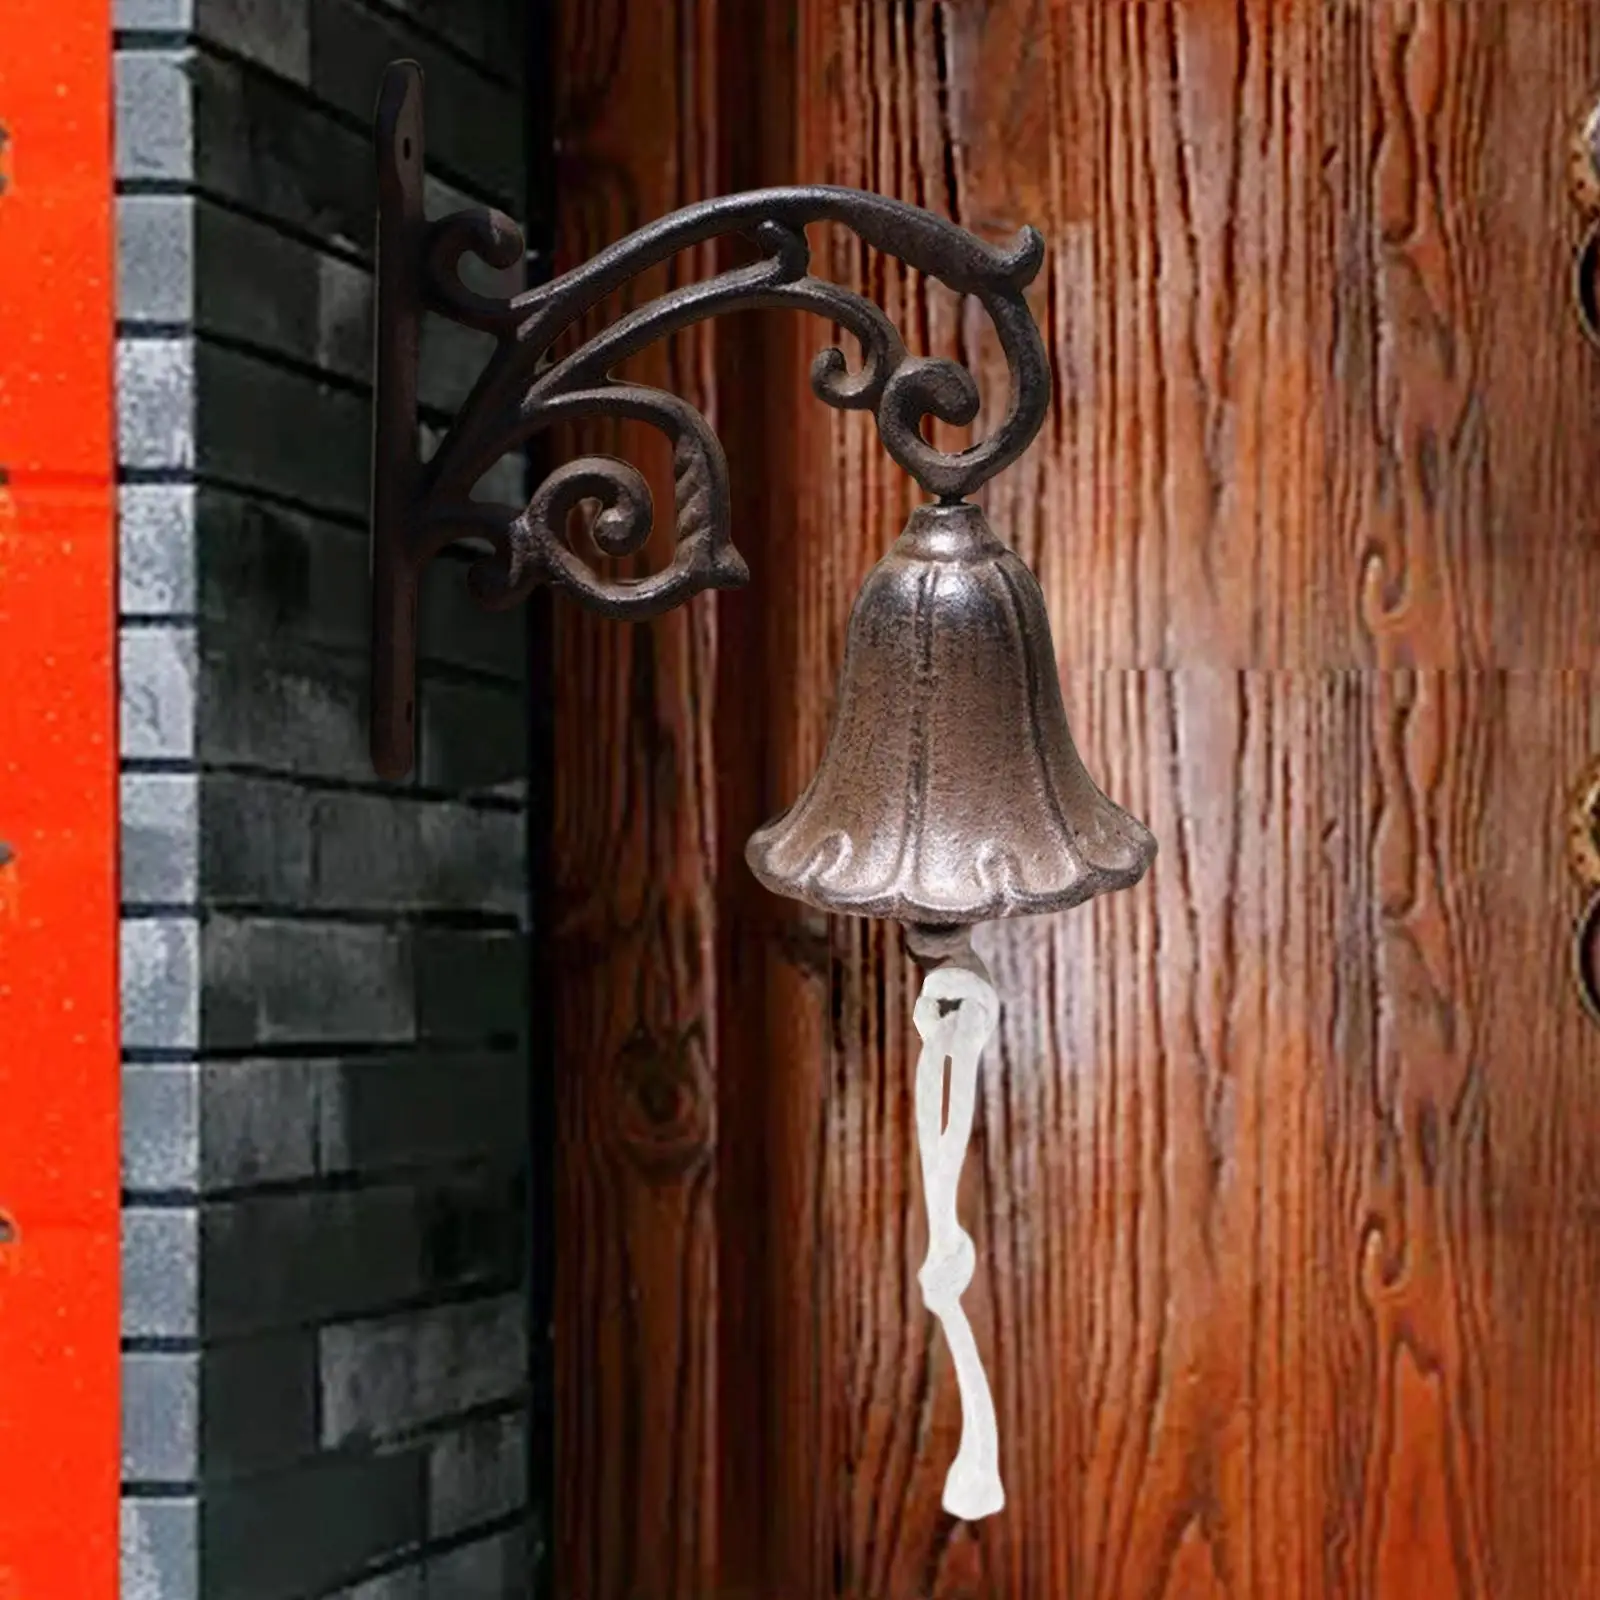 Rustic Cast Iron Hand Bell Iron Cast Dinner Bell Welcome Sign Wall Decorative Accessories Front Doorbell for Outdoor Indoor Wall